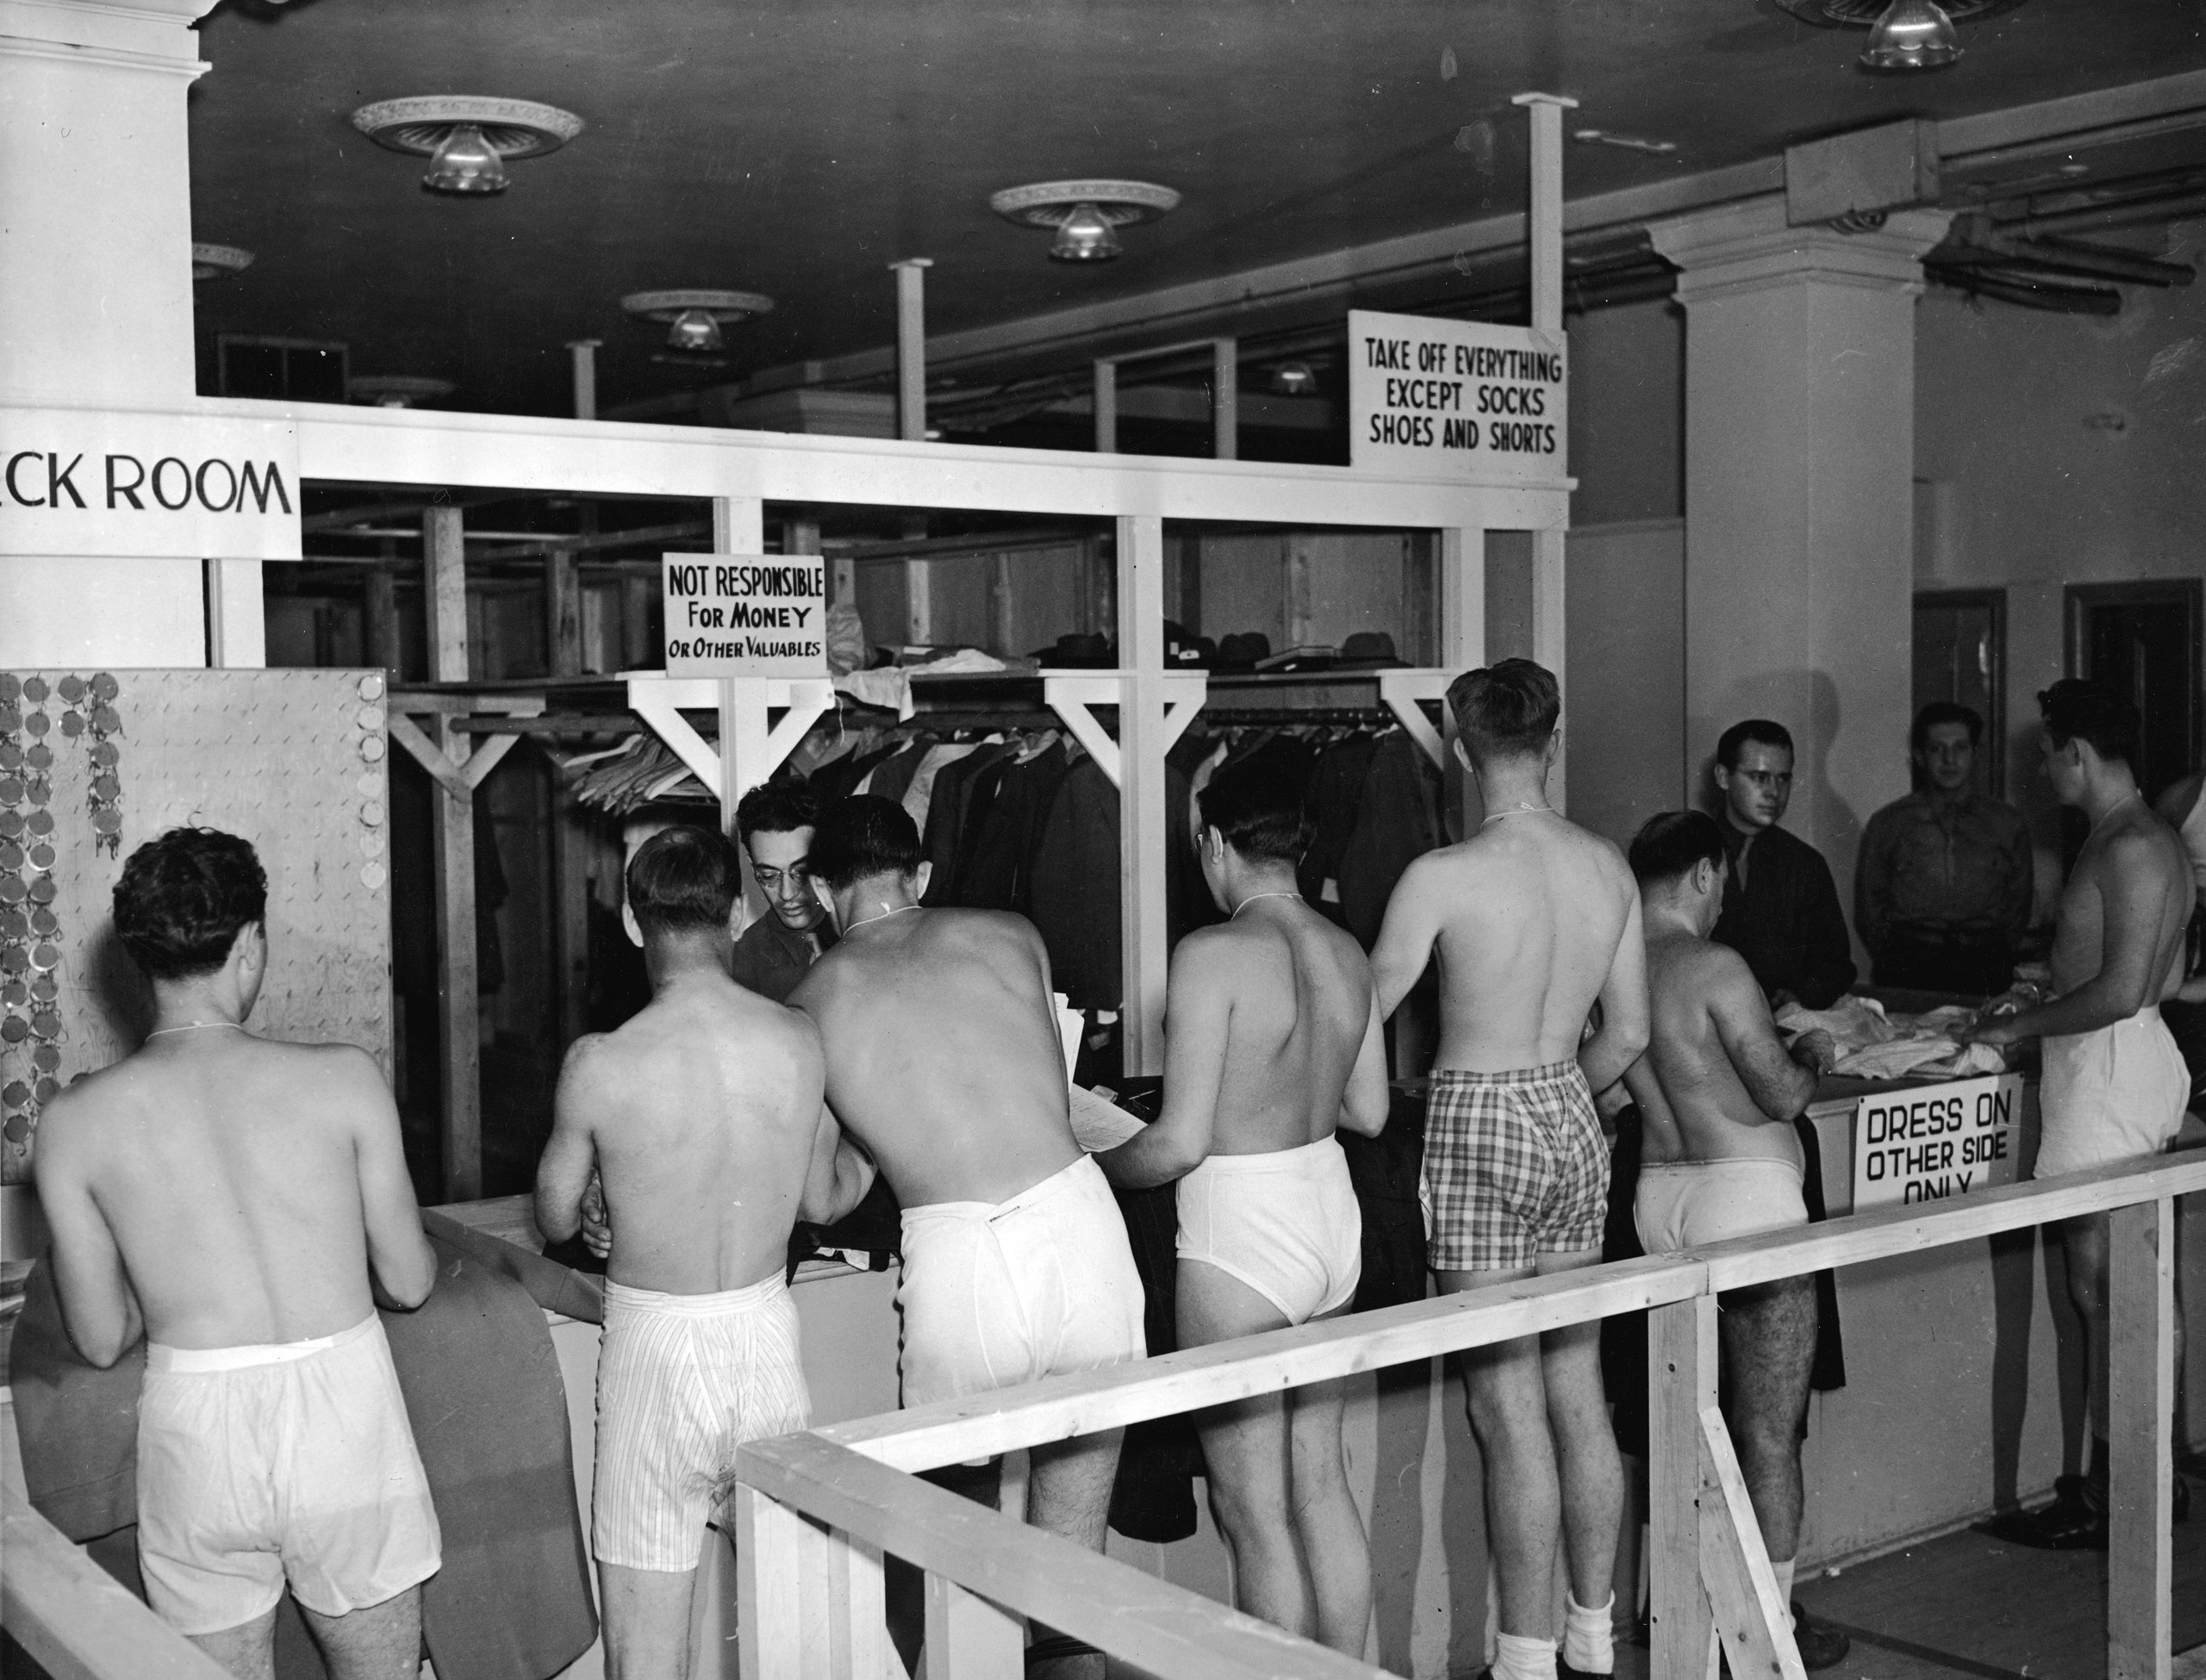 A line of underwear-clad draftees wait in line to check their clothes at an unidentified military facility, August 1944.